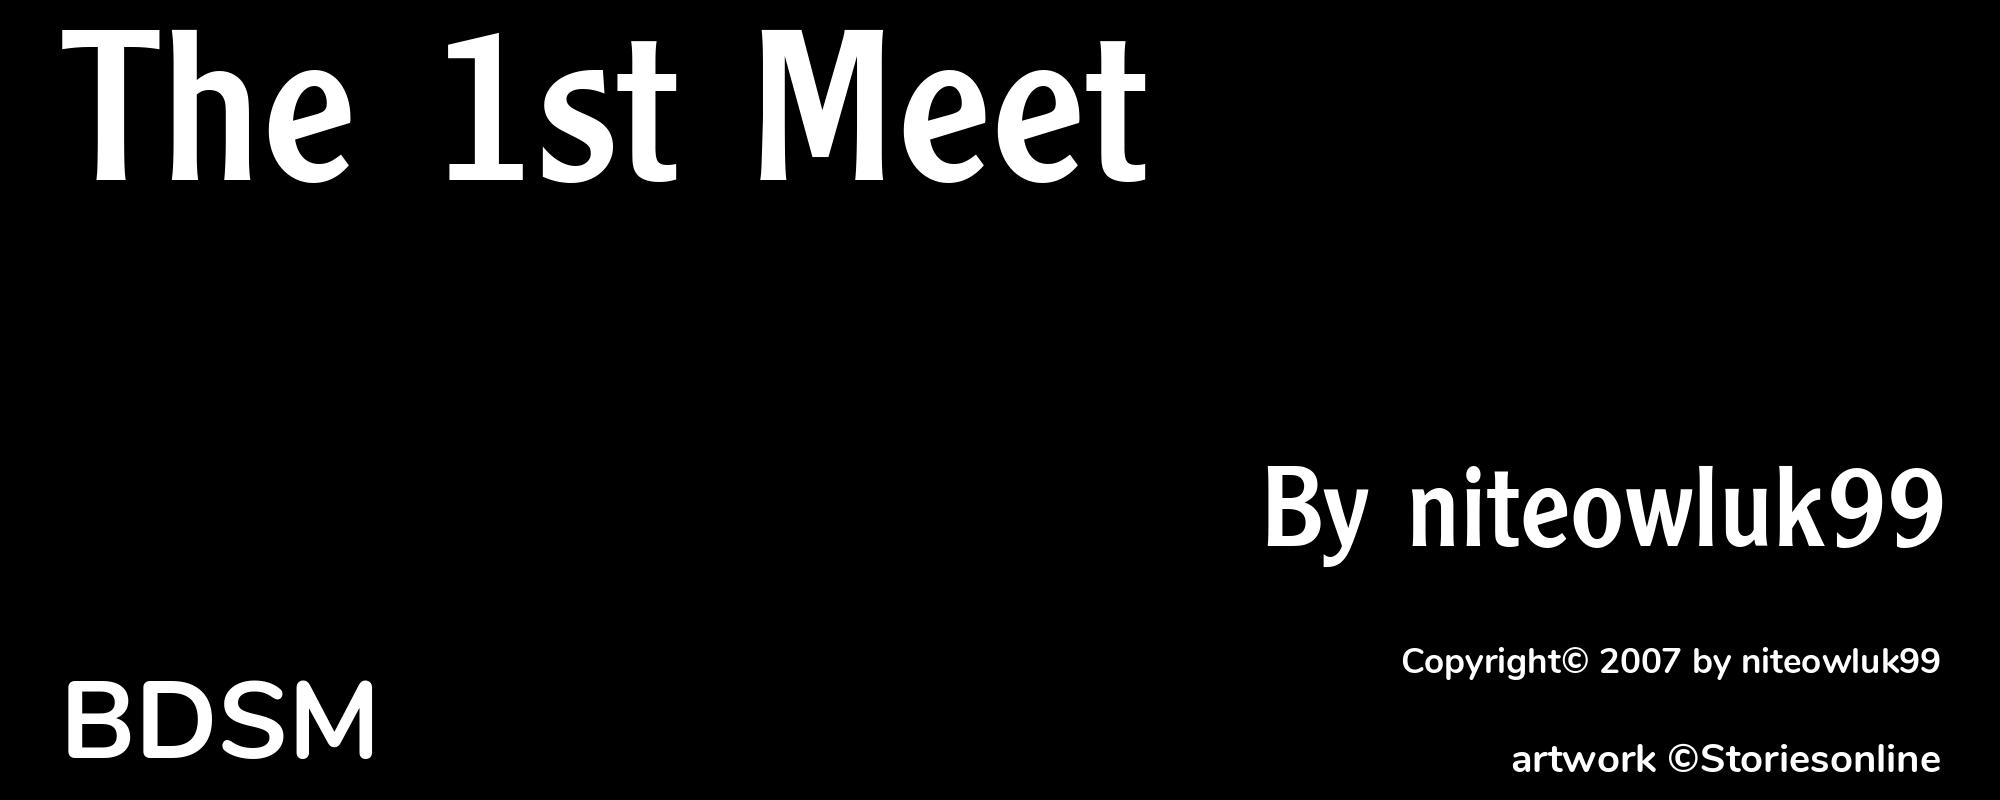 The 1st Meet - Cover